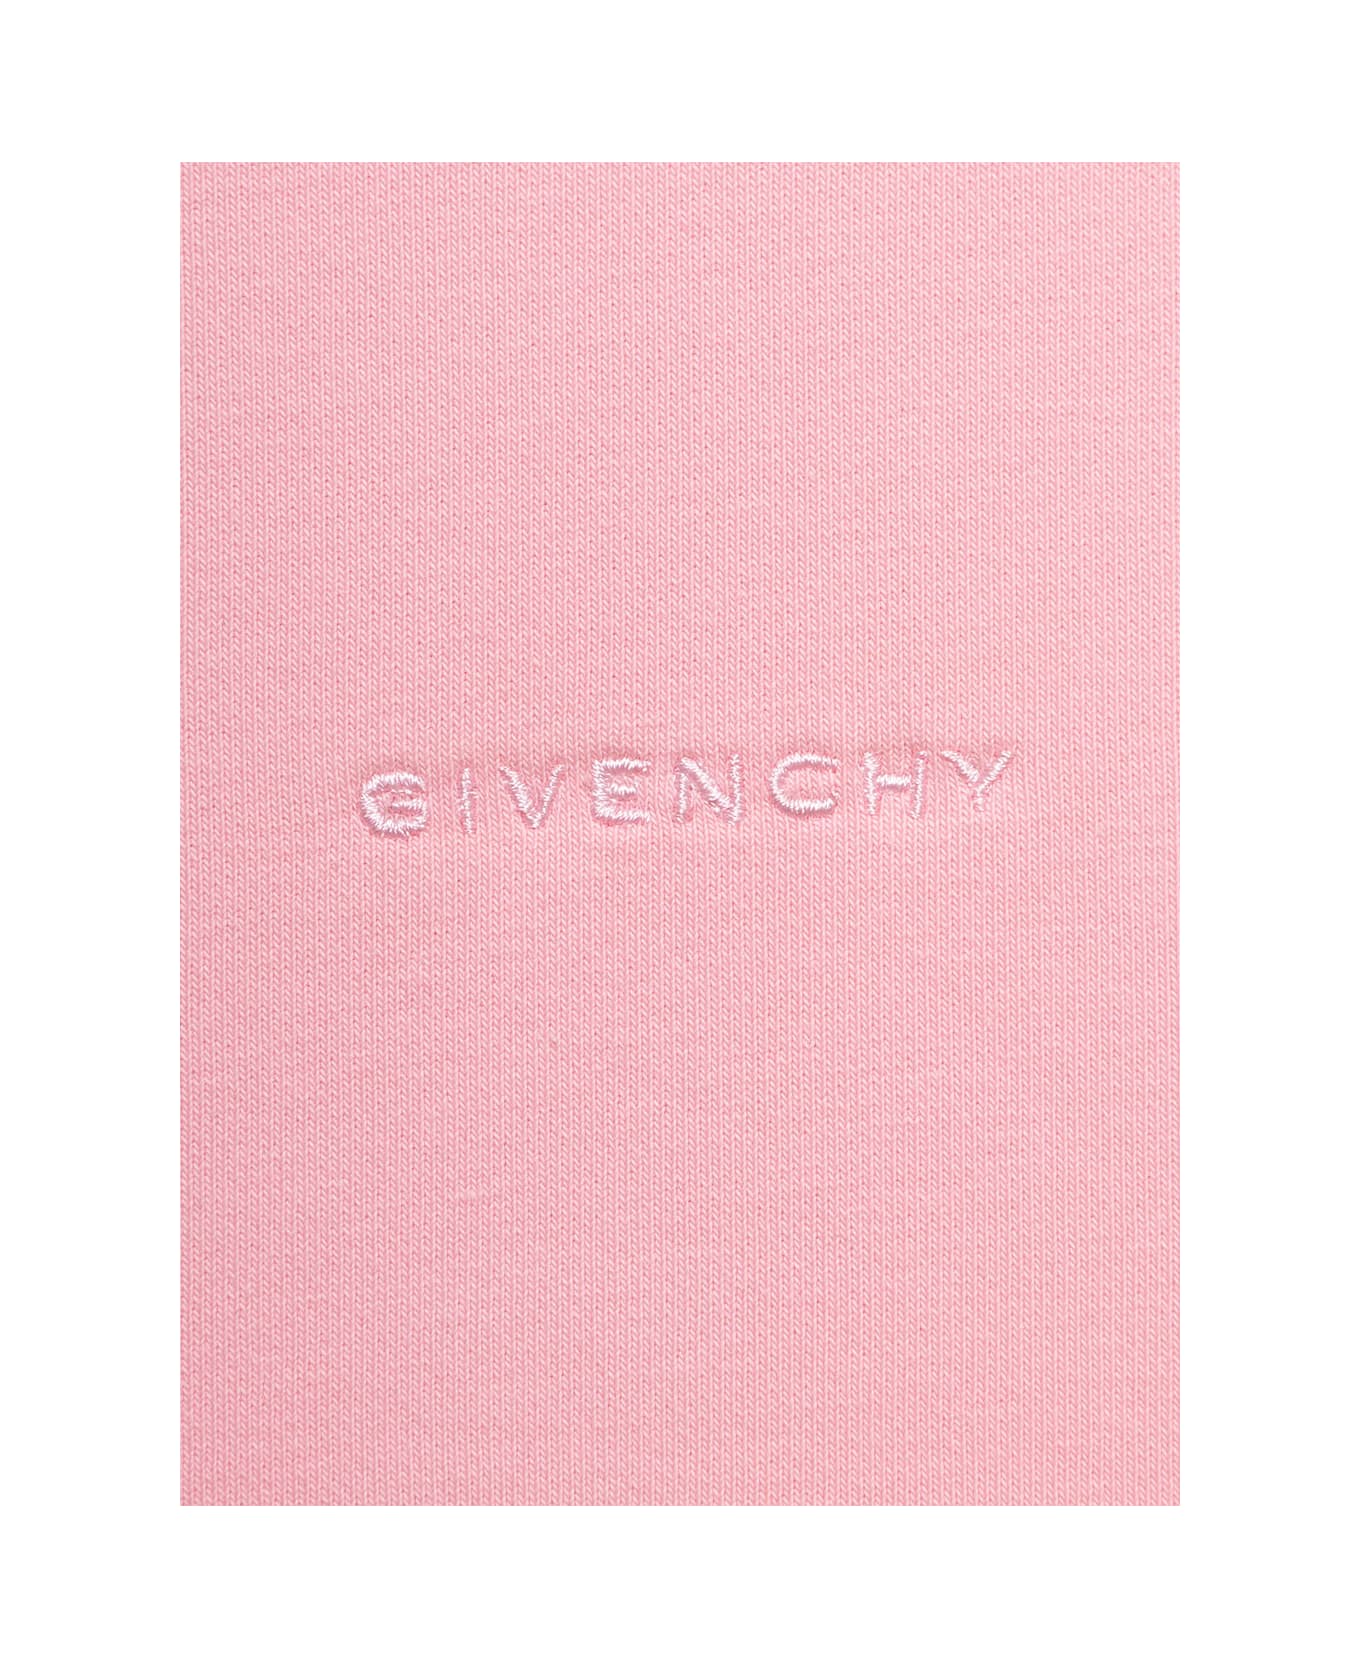 Givenchy Kids Girl's Pink Sweatshirt With Back Embroidery - Pink